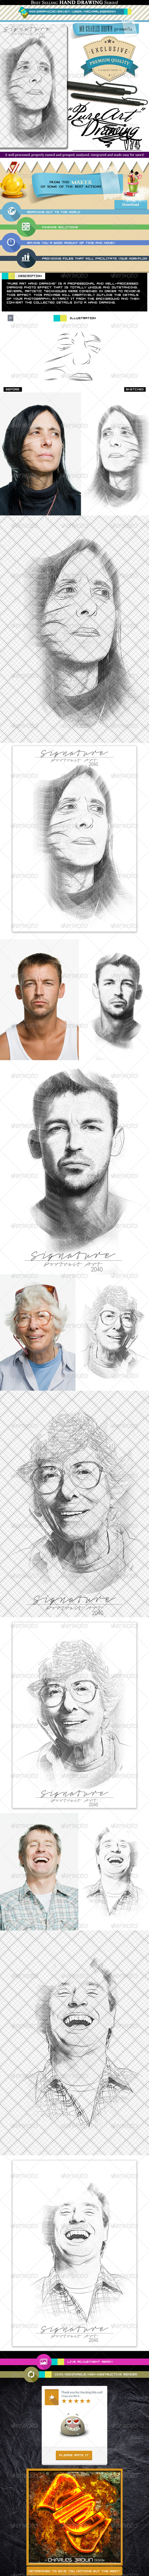 GraphicRiver Pure Art Hand Drawing 74 Portrait Art Drawing 1 7671697